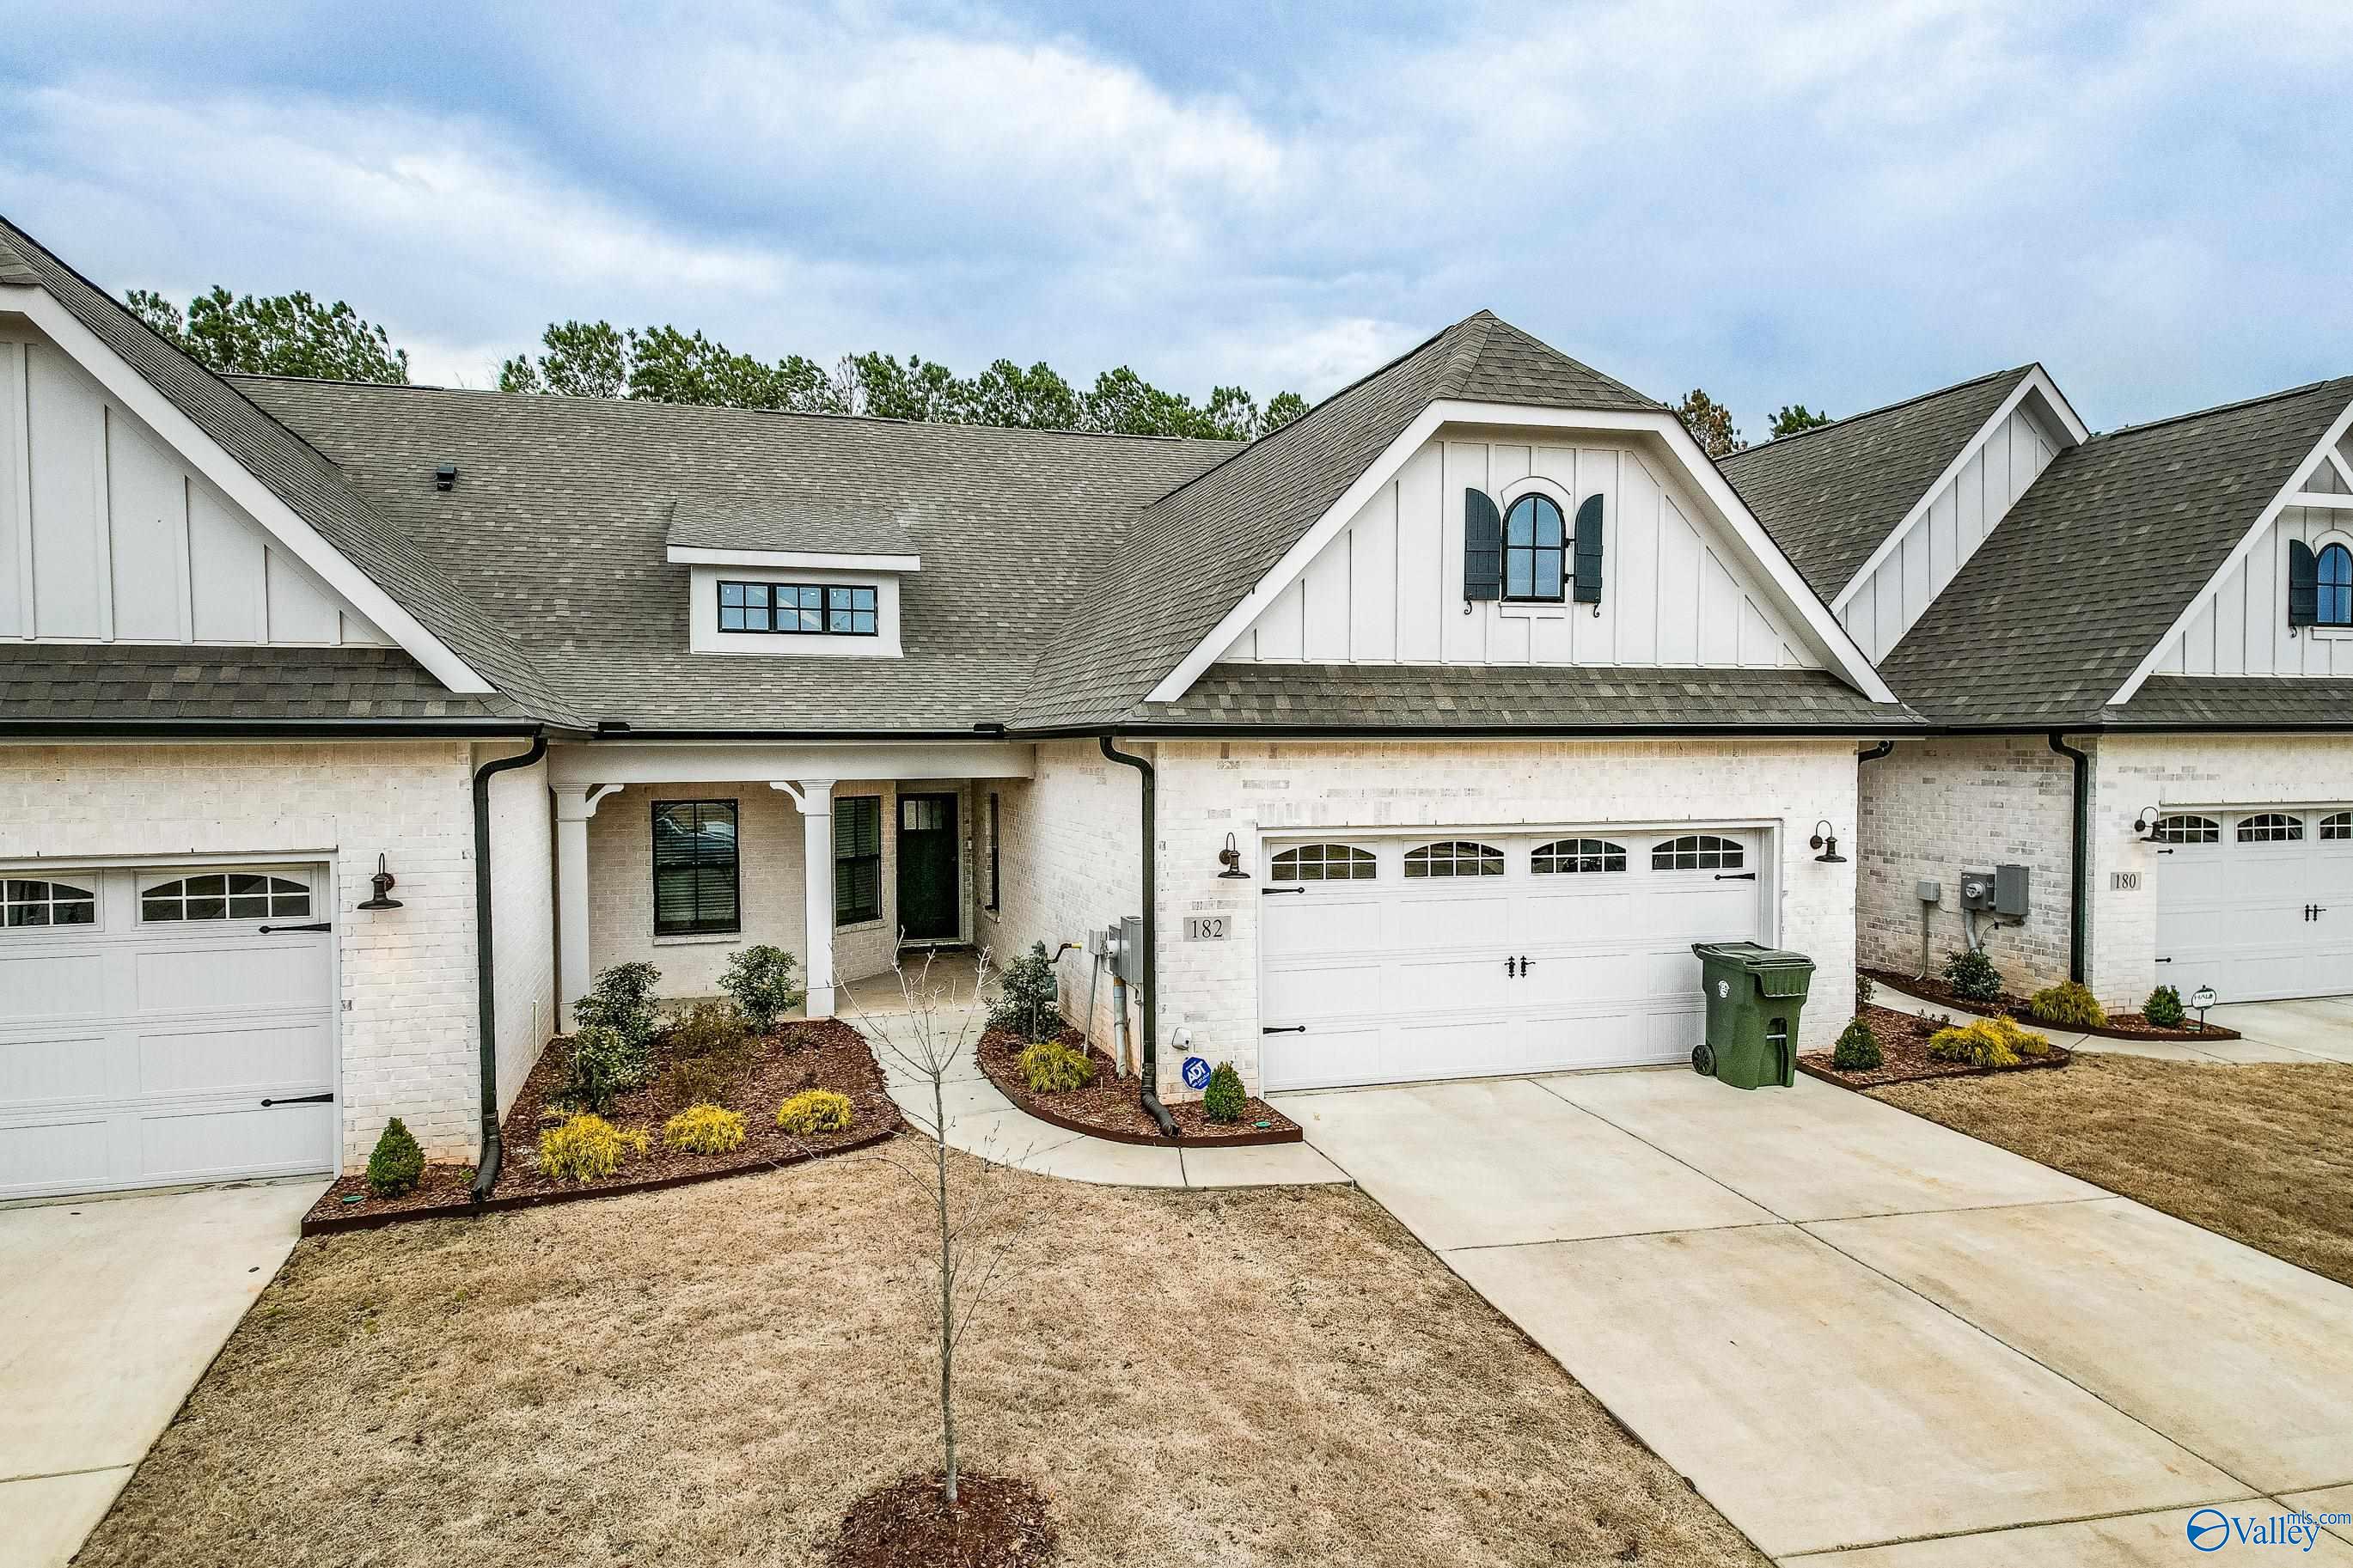 Property: 182 Rugby Drive,Madison, AL